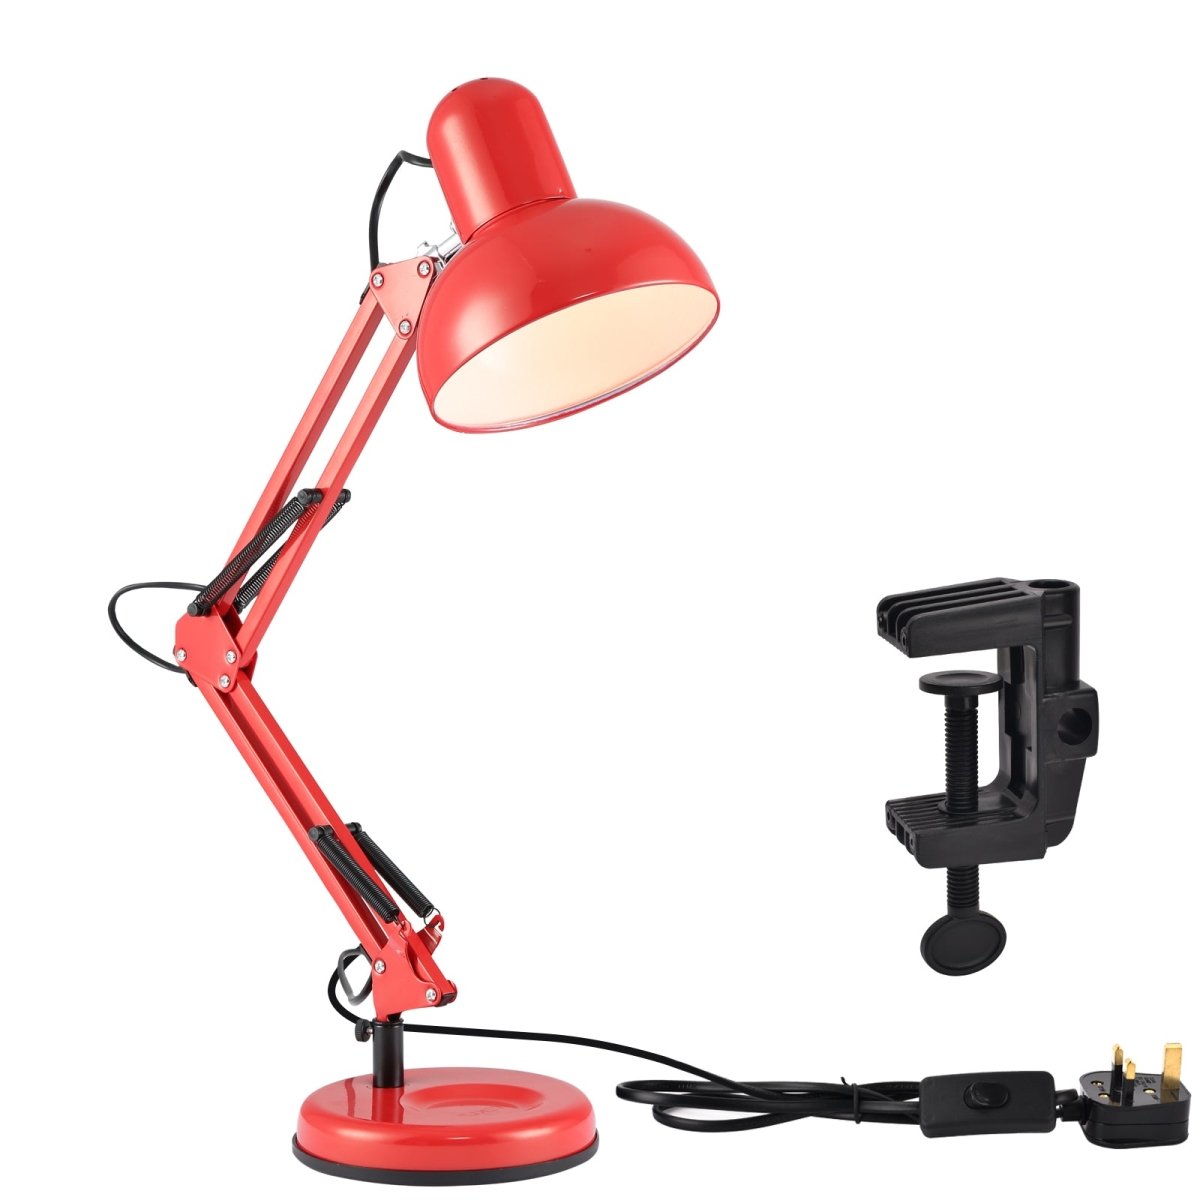 Main image of Atlas Architect Swing Arm Red Desk Lamp with Clip E27